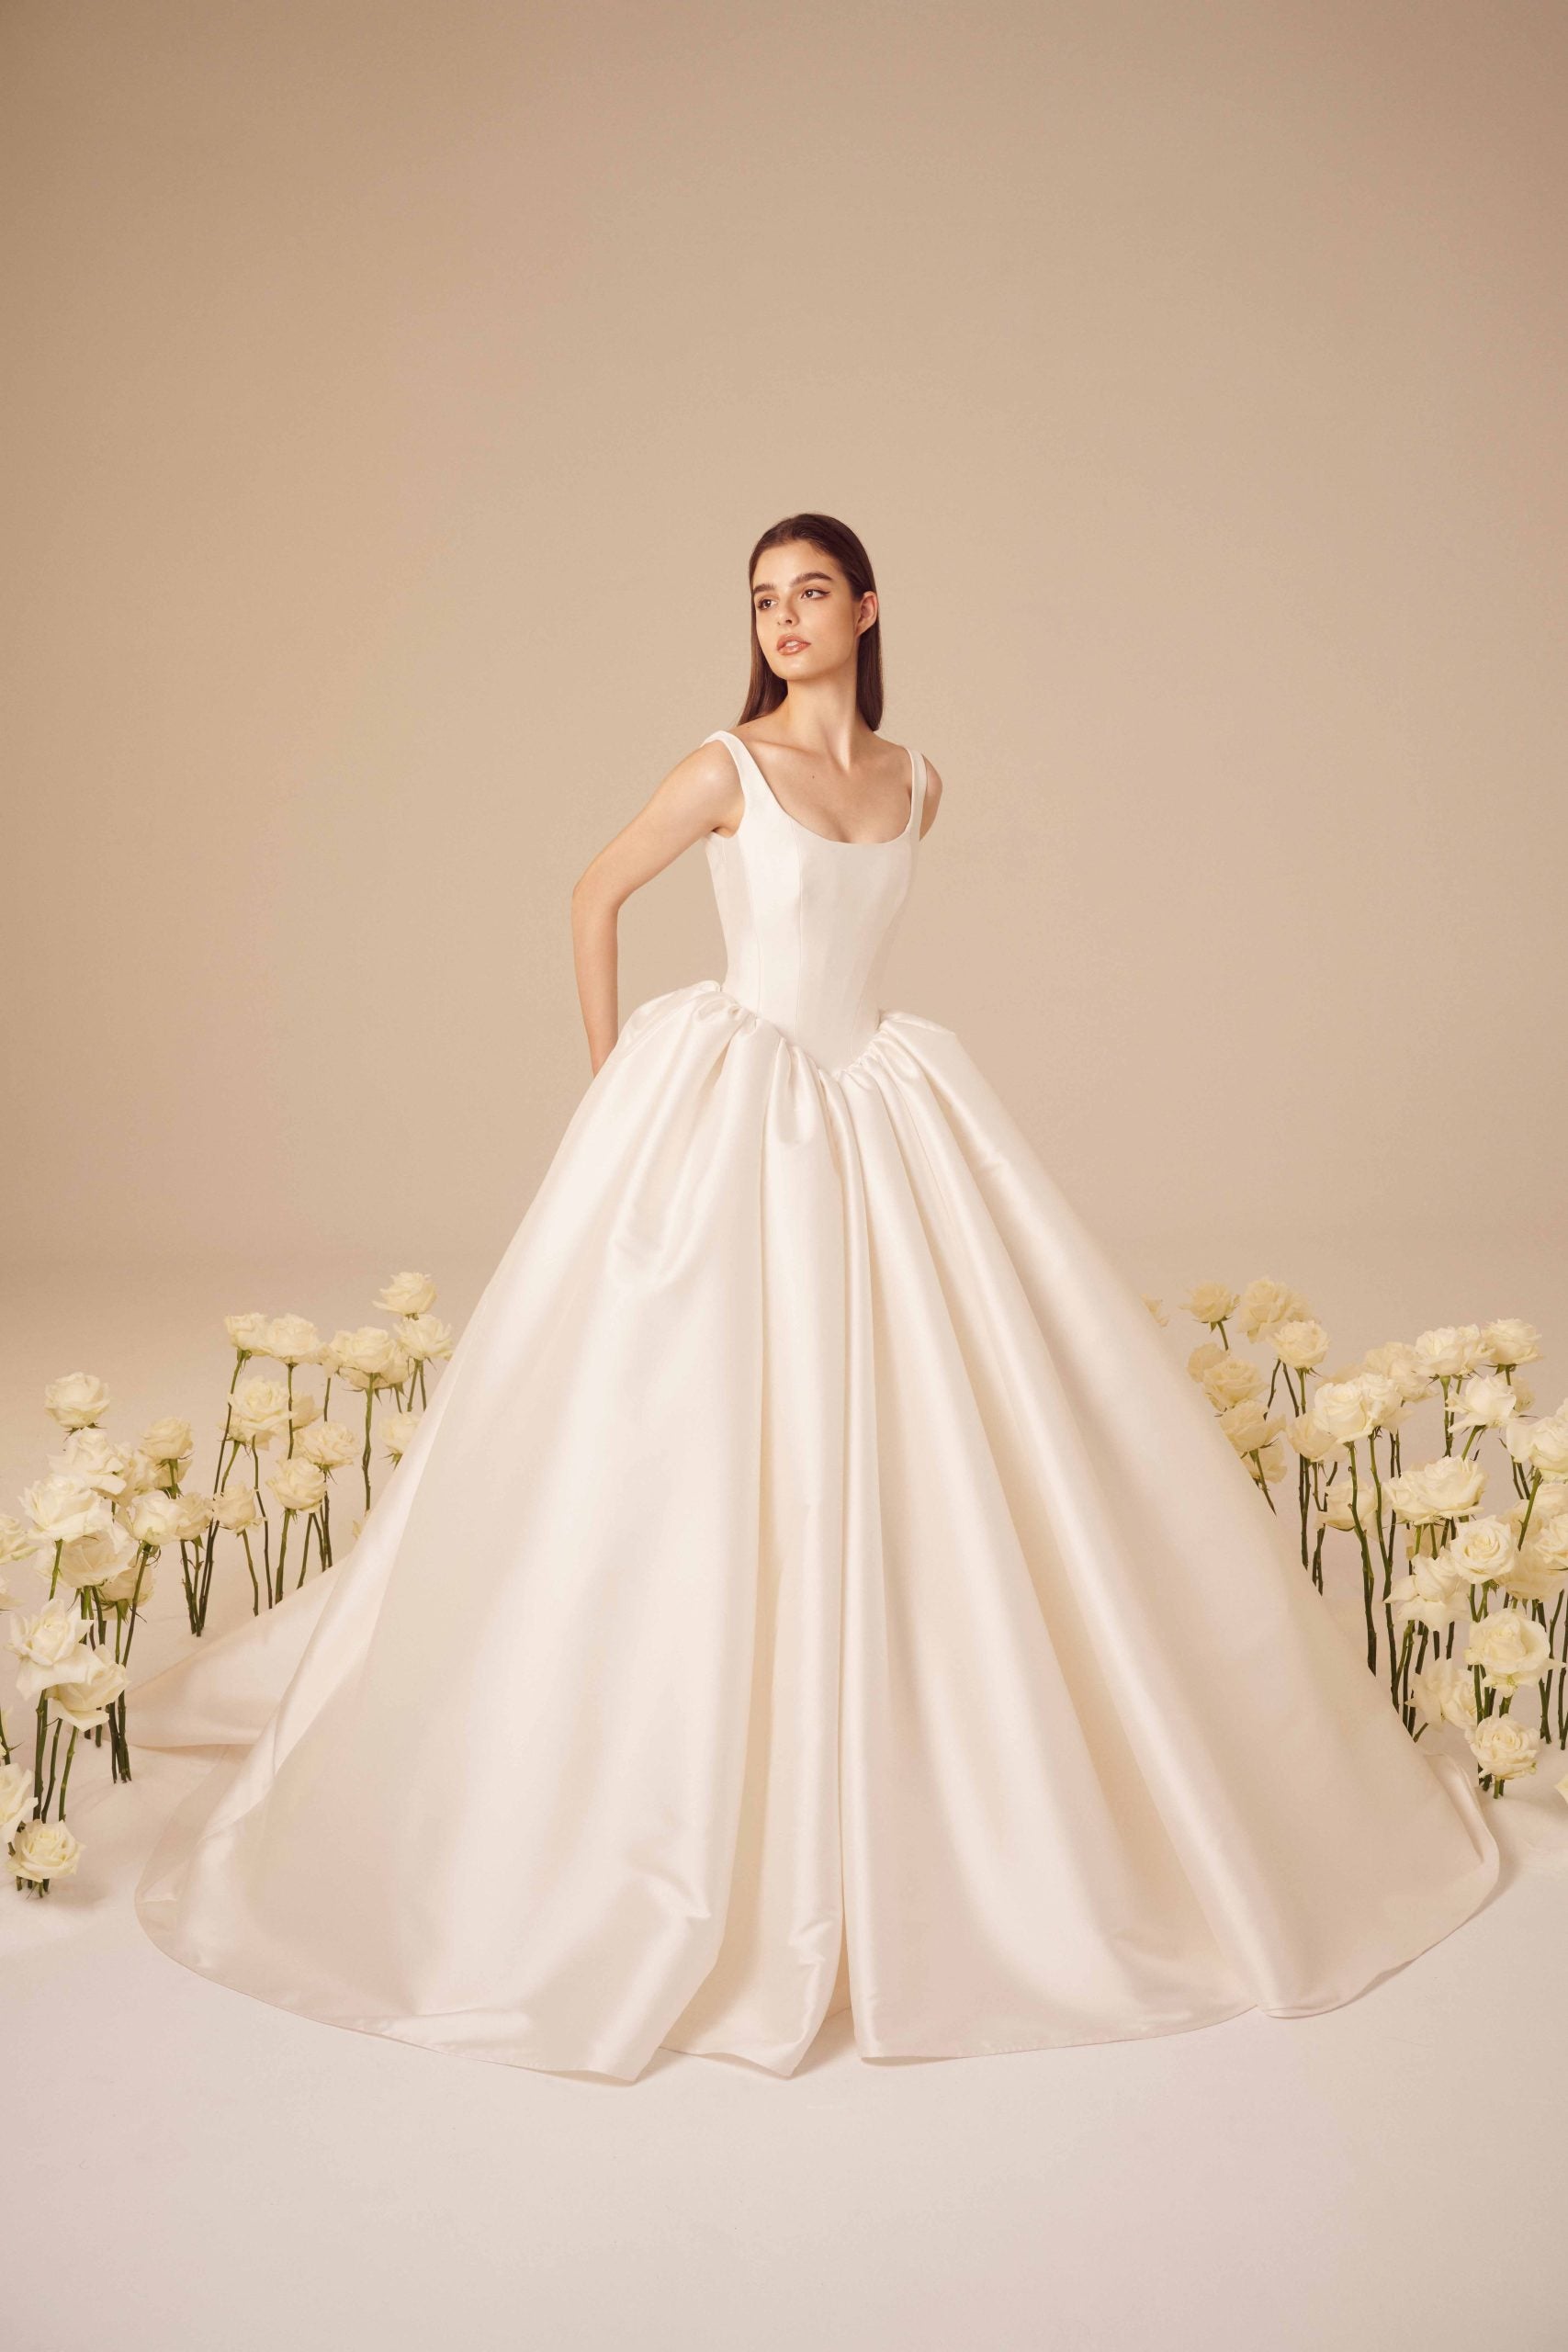 Dramatic And Elegant Basque Waist Ball Gown by Nicole + Felicia - Image 1